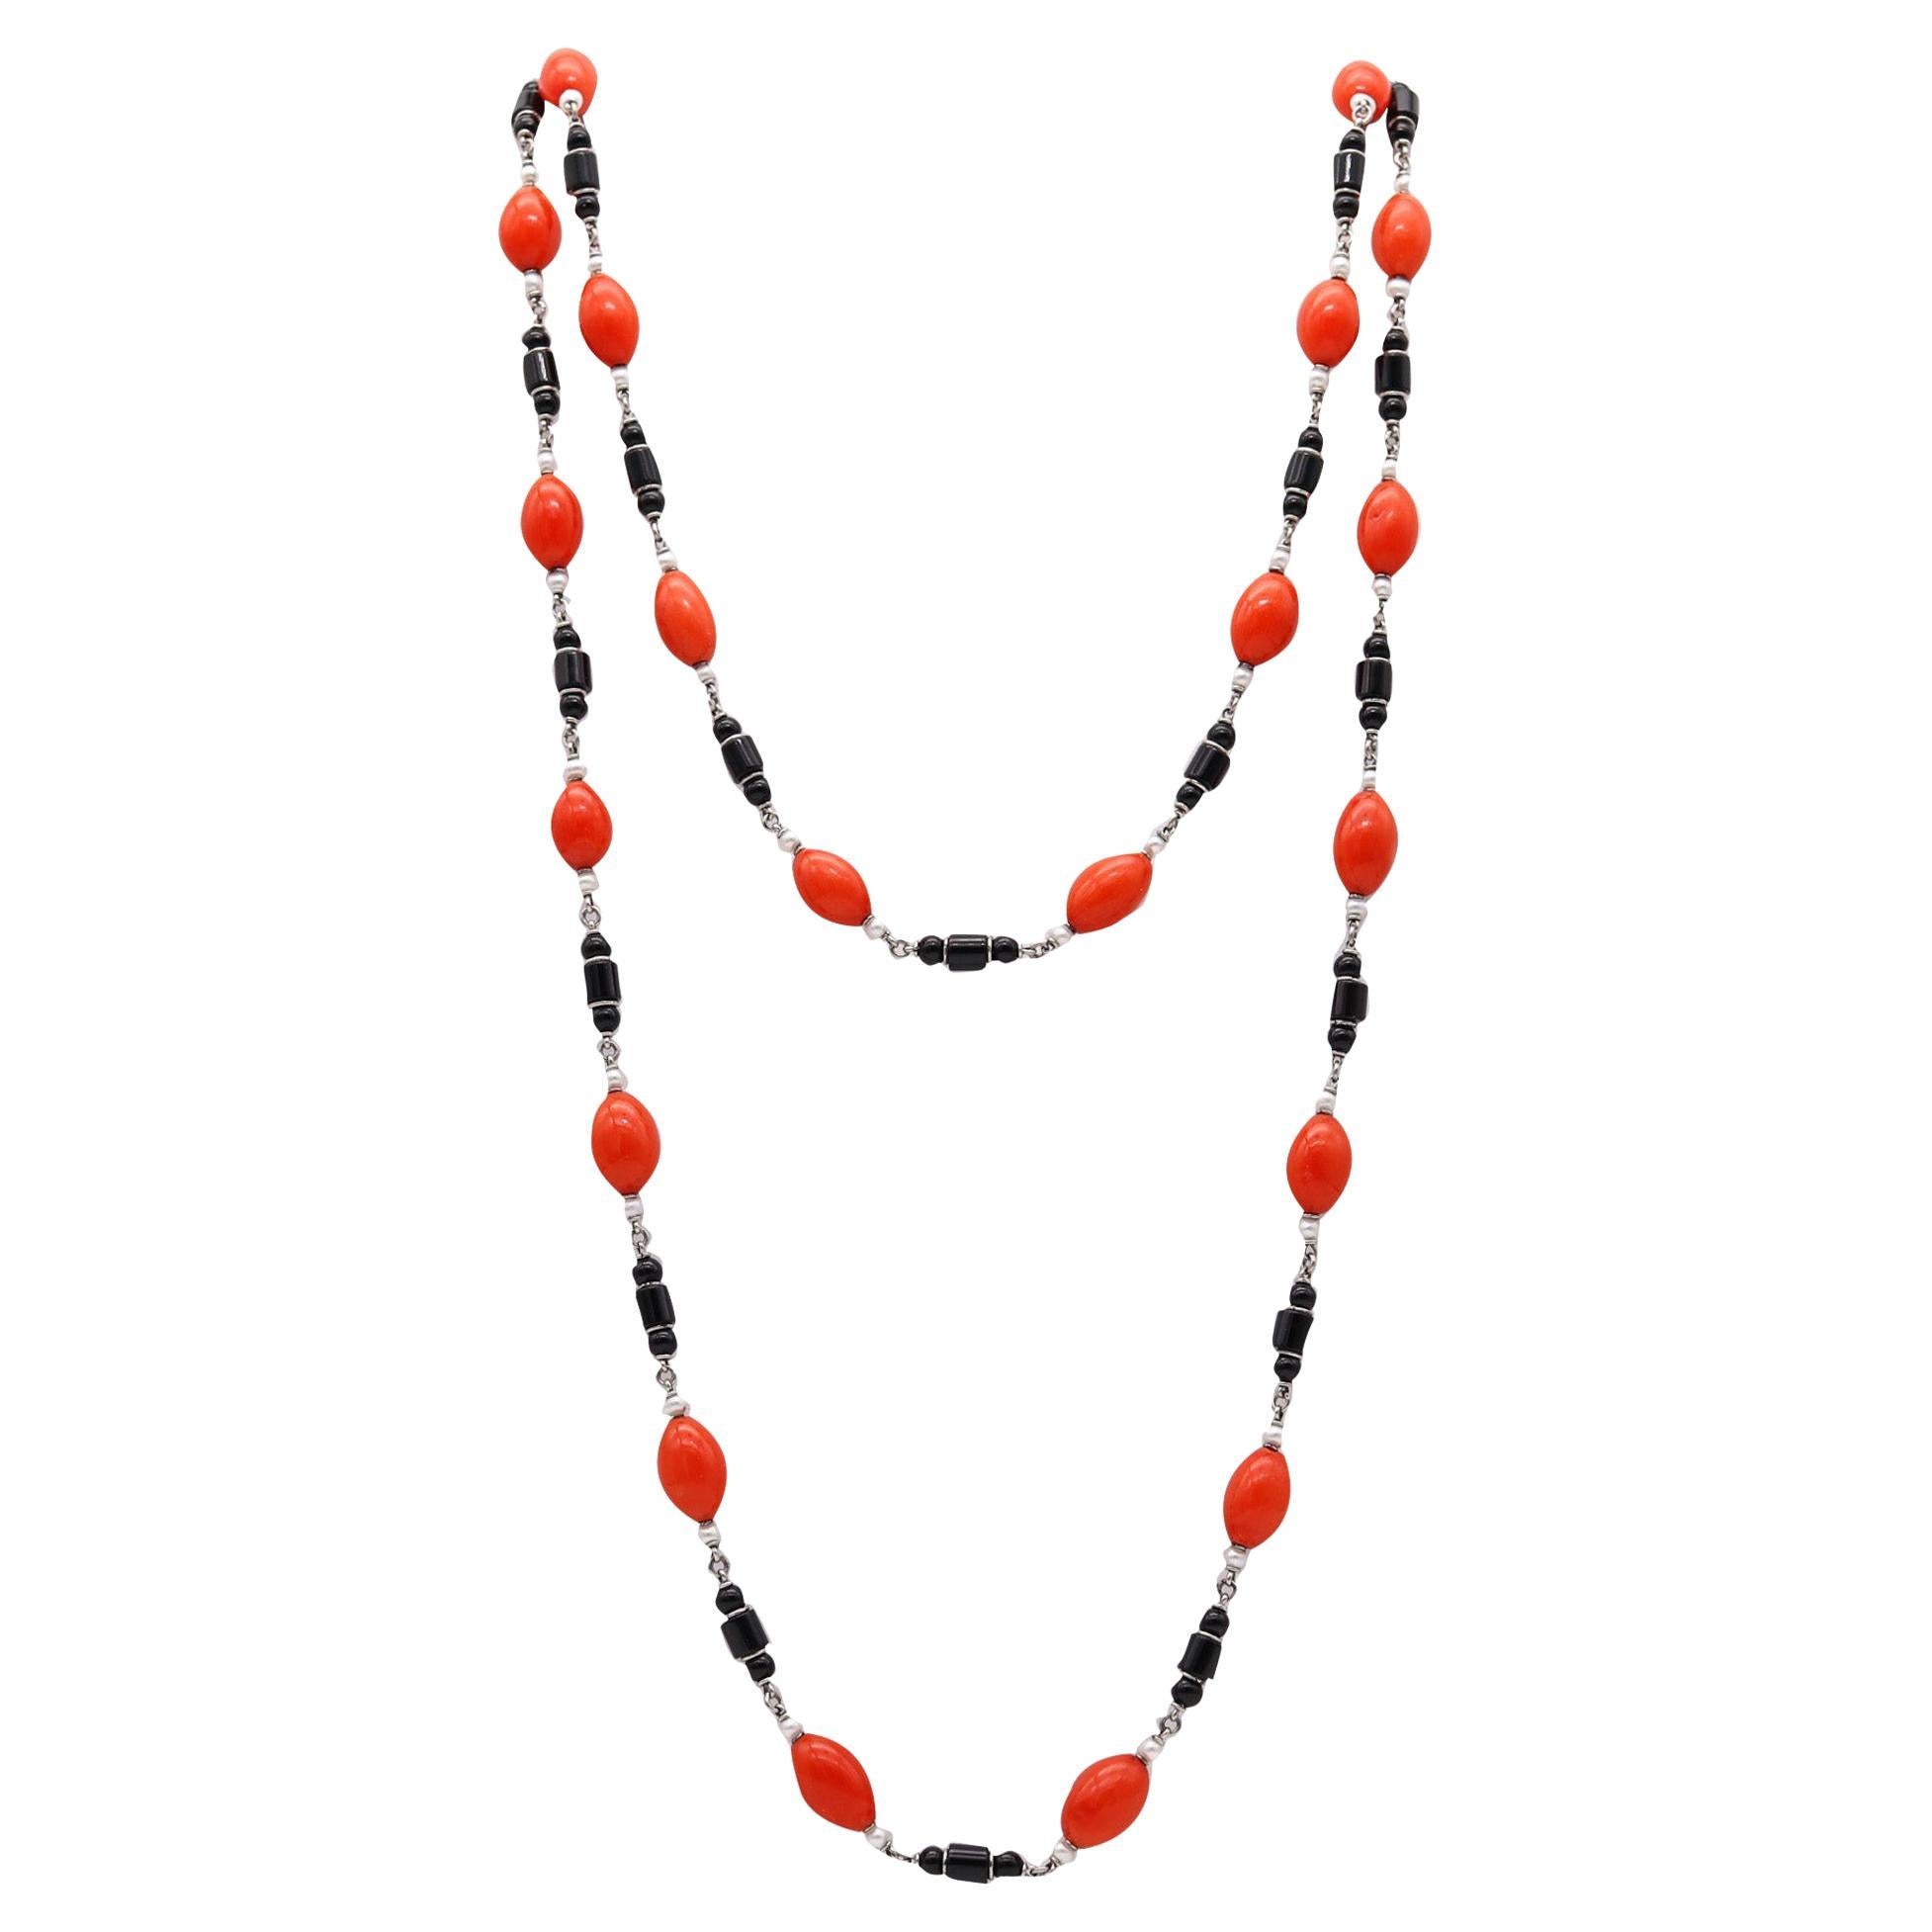 Art Deco Long Necklace Sautoir in Platinum with Red Coral Onyx and Pearls